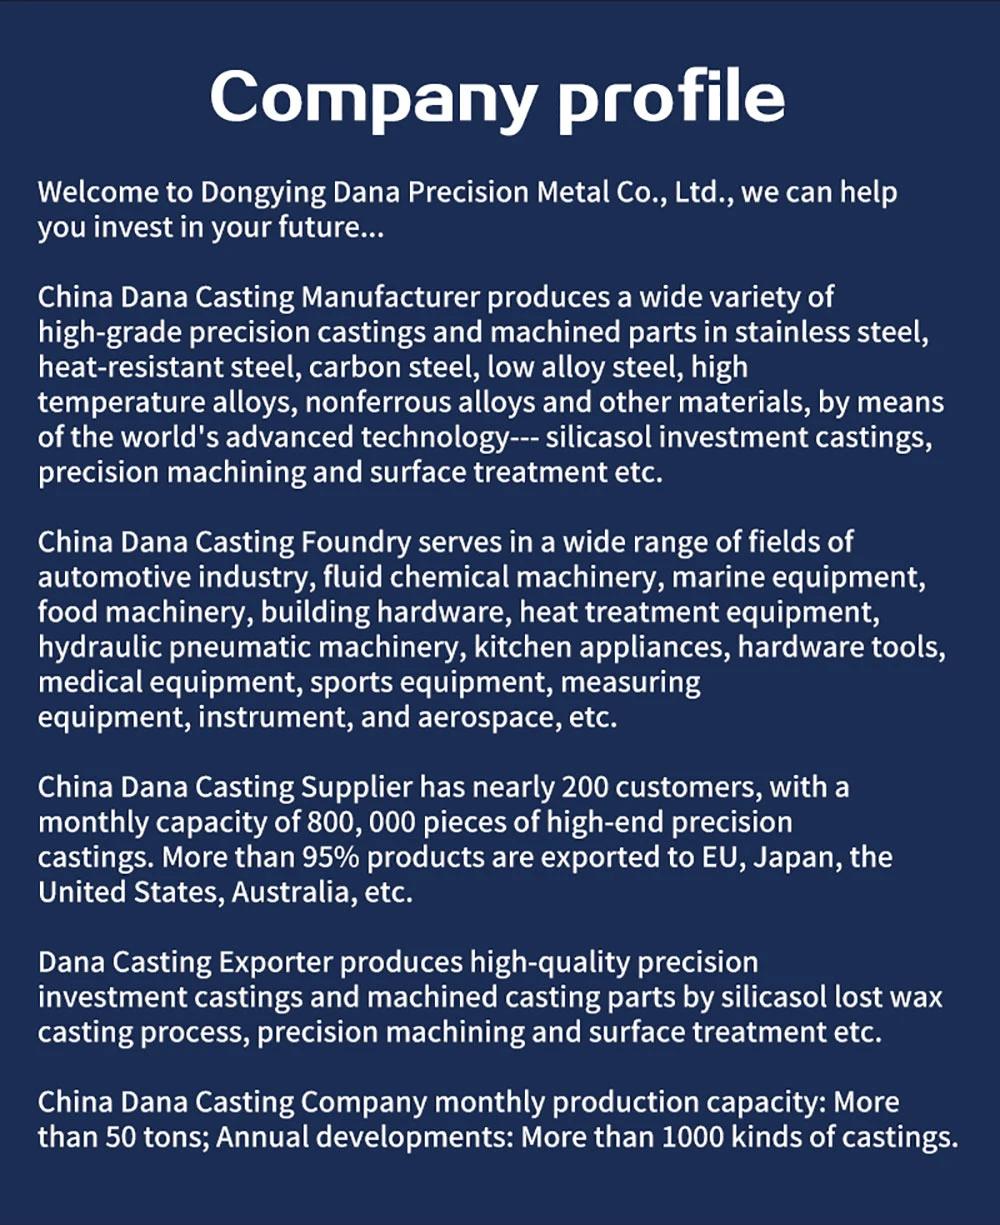 Steel Casting/ Investment Casting/ Cast/ Machining/ Lost Wax Casting/ Precision Casting